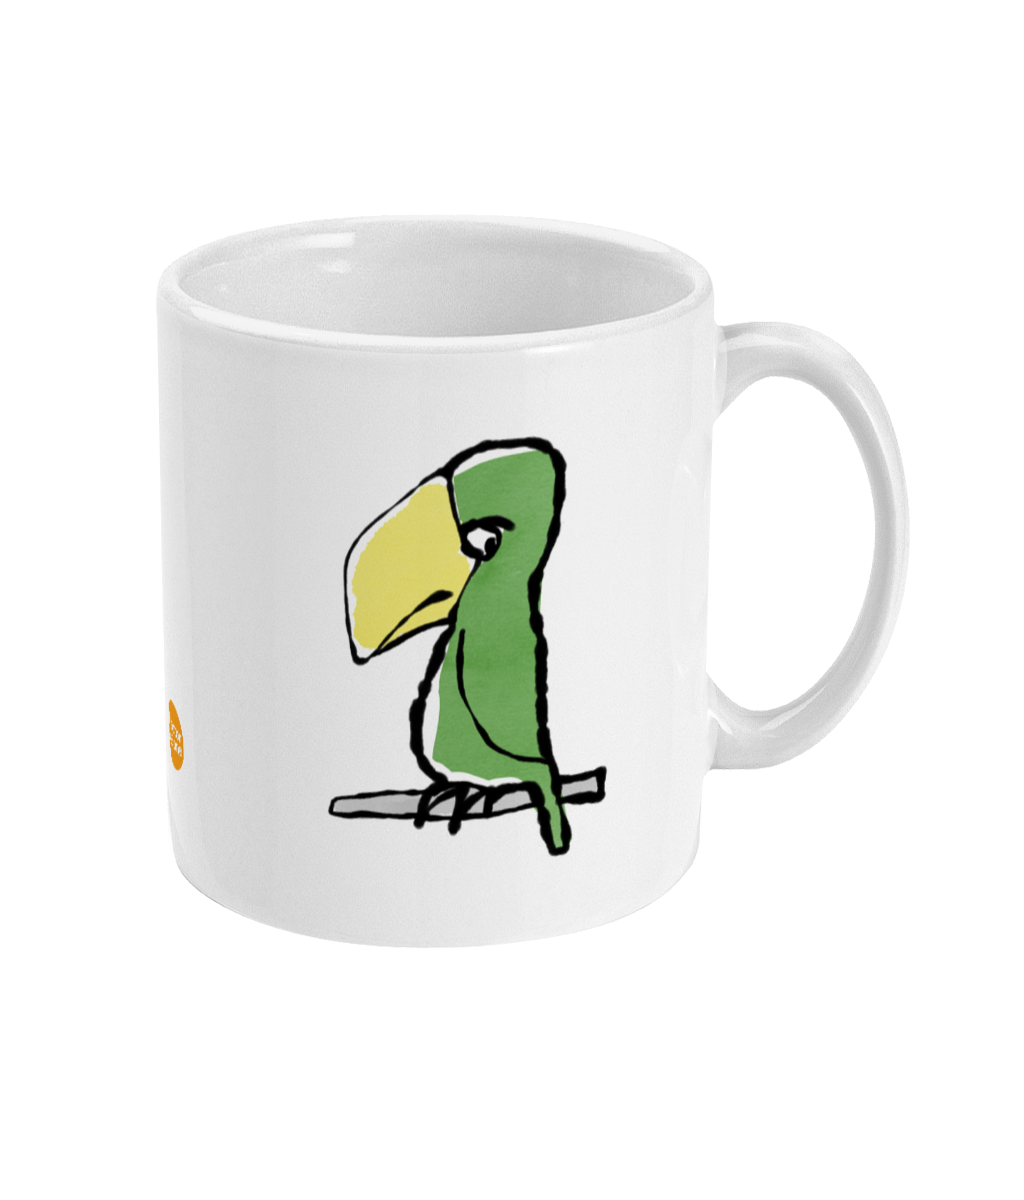 Peter Parrot Mug - Funny grumpy parrot illustrated coffee mug by Hector and Bone Right View